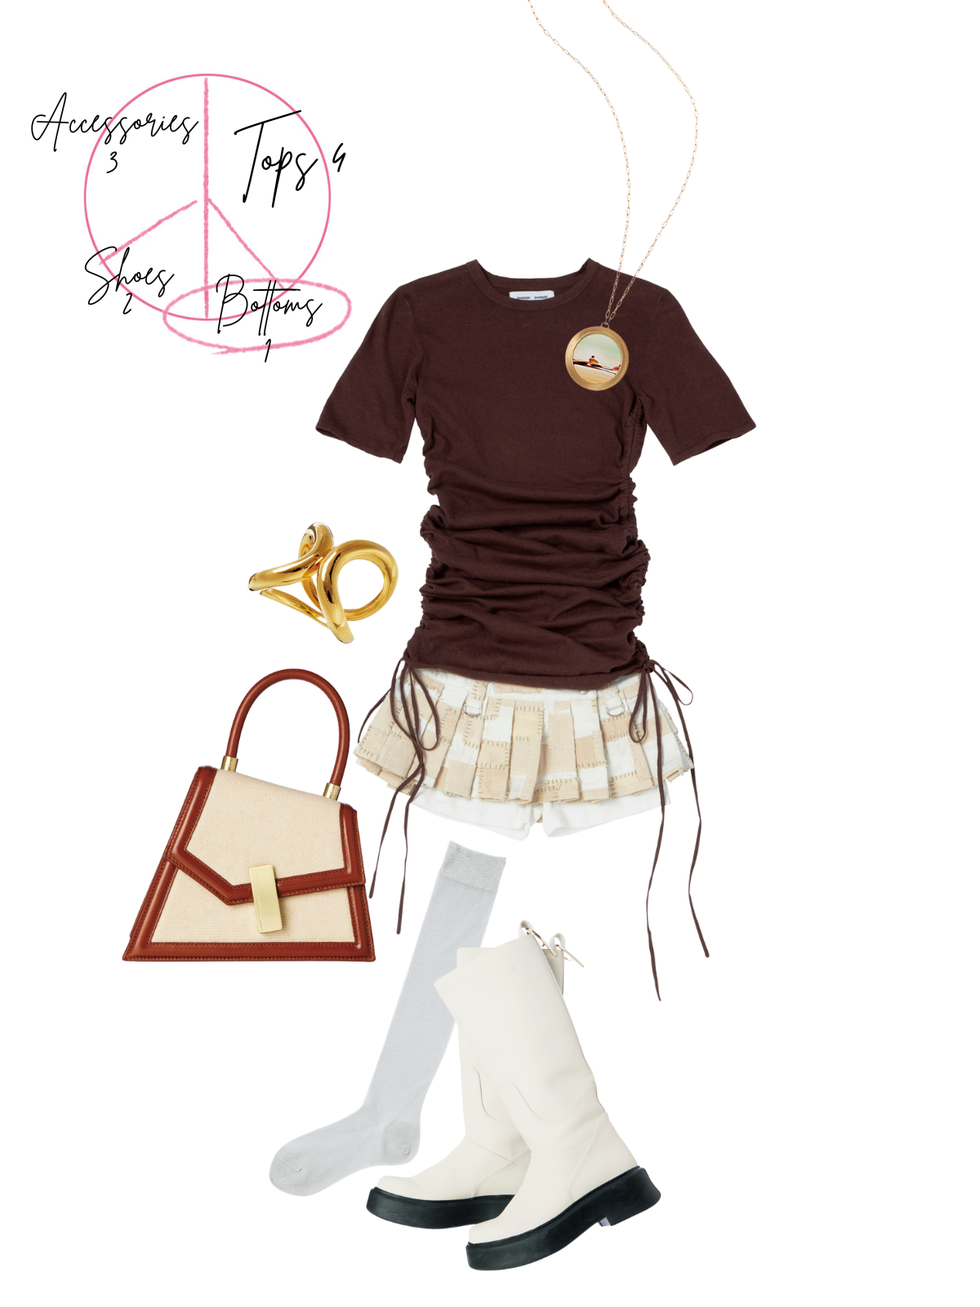 a person wearing a brown shirt and white skirt with a drawing of a person's face on